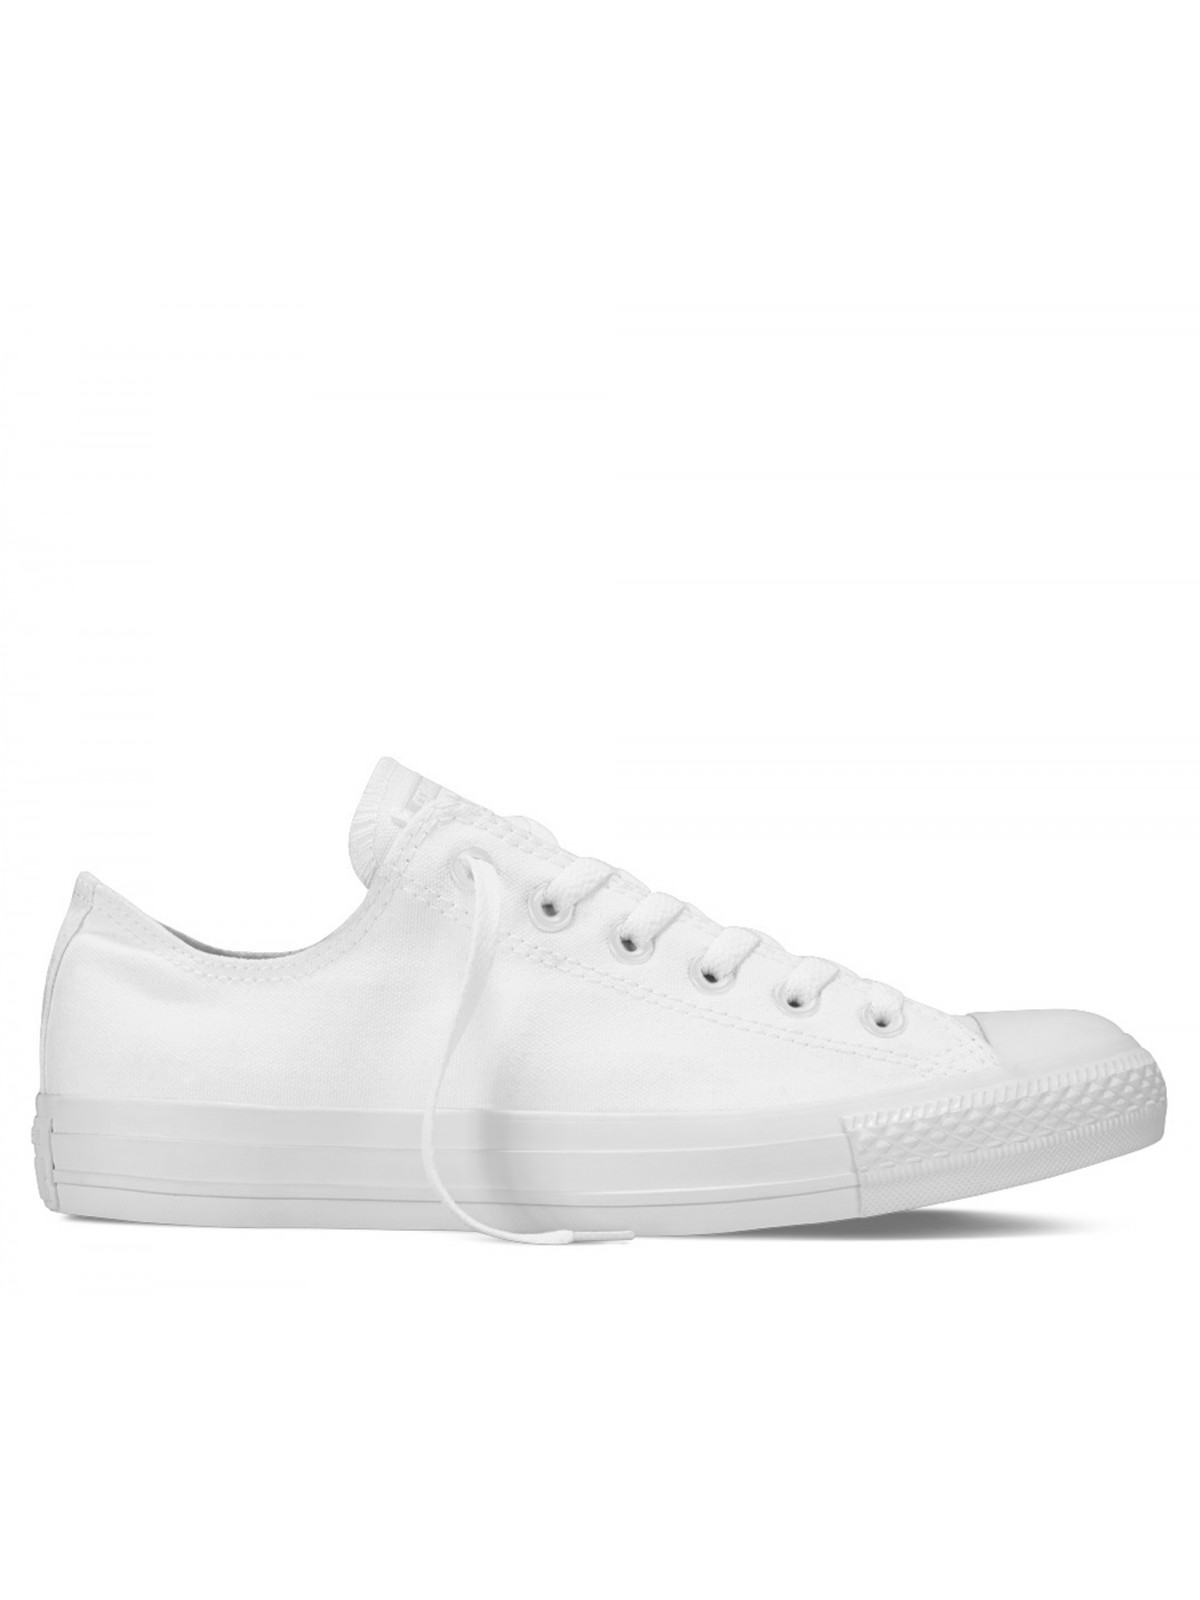 converse basse blanche magasin